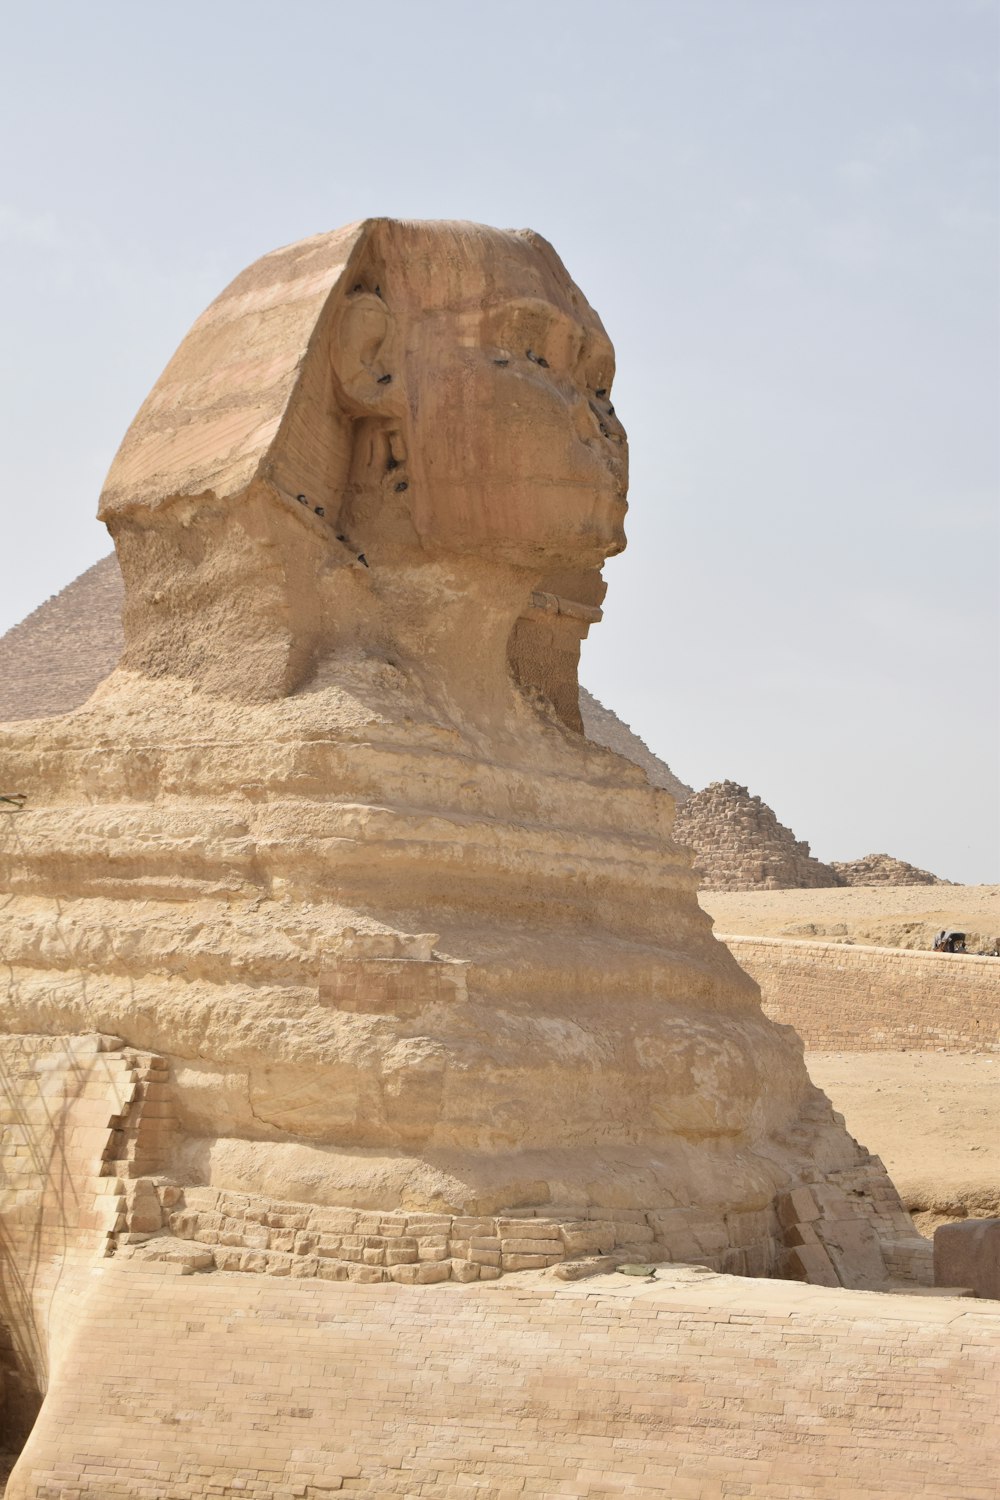 a large rock sculpture with Great Sphinx of Giza in the background